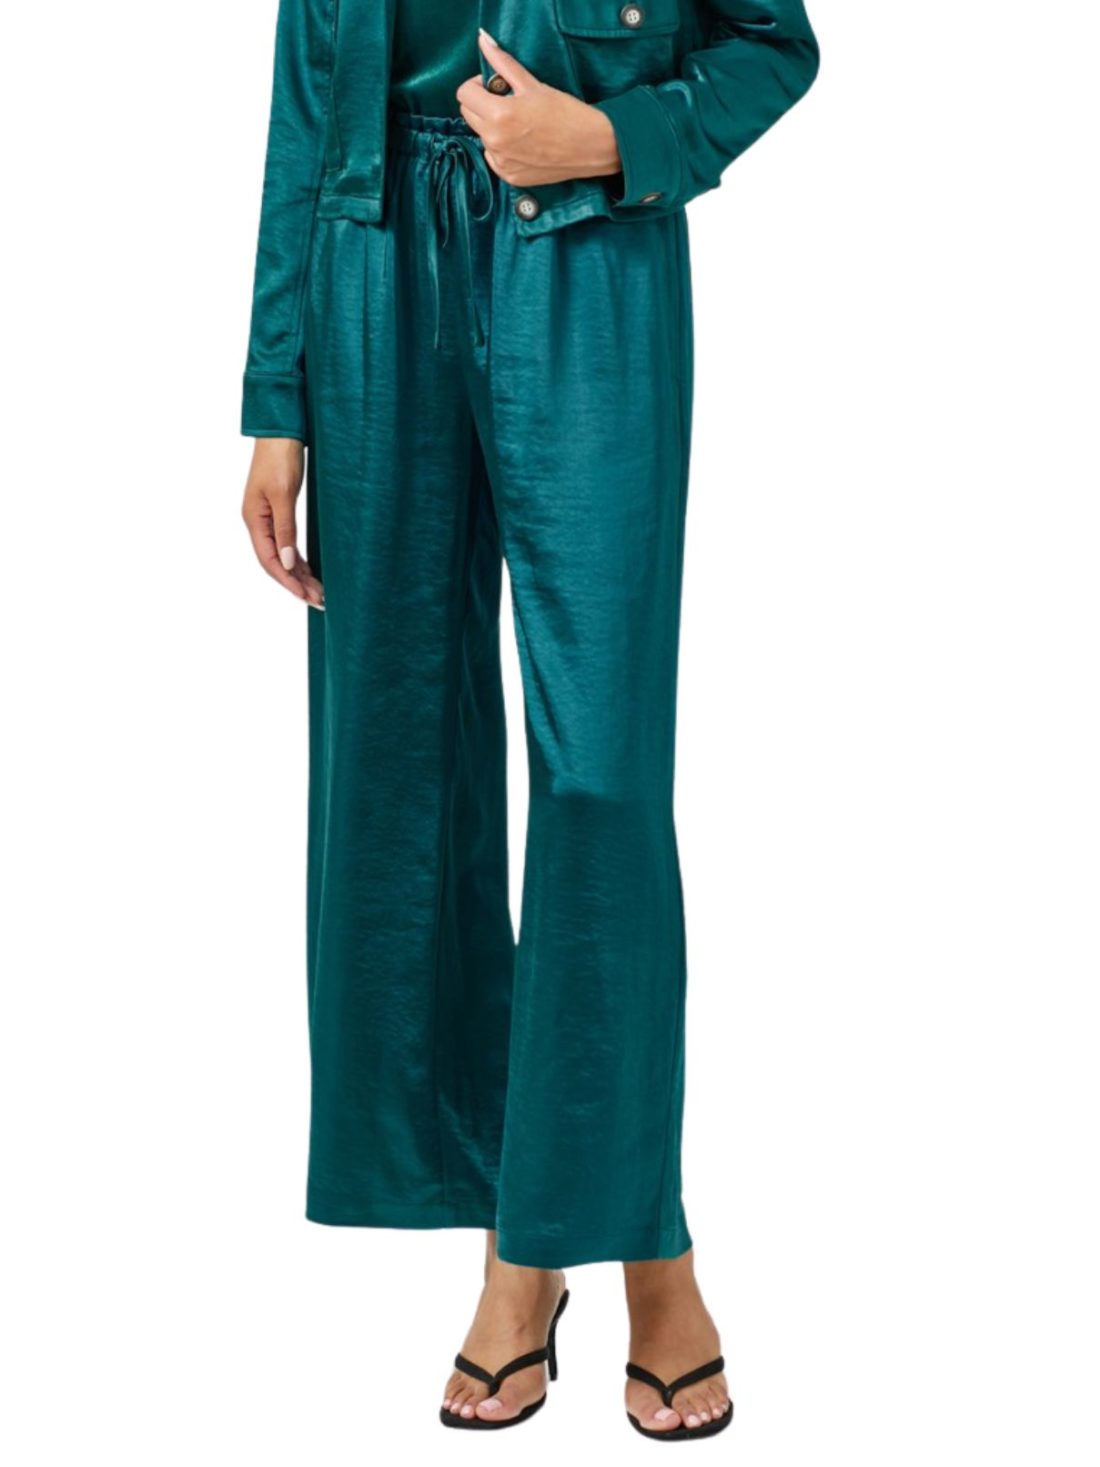 silky wide leg satin pant in teal